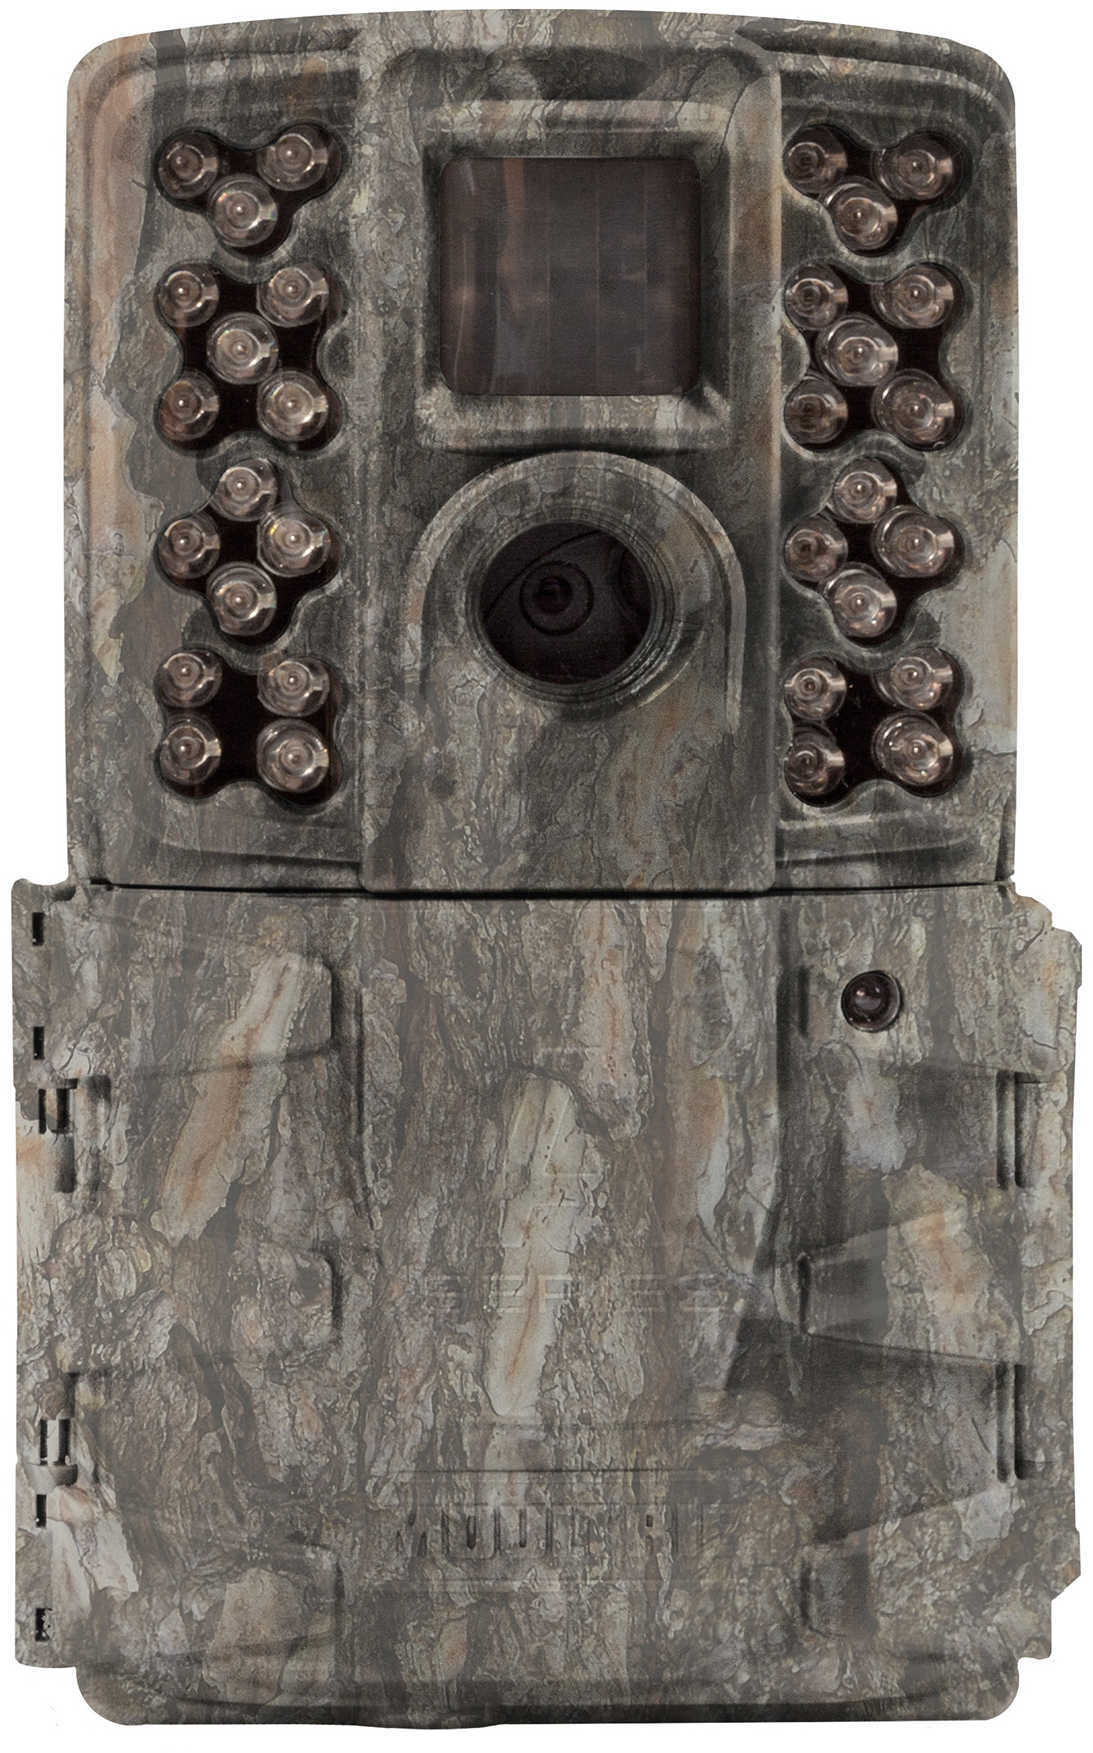 Moultrie Feeders Game Camera A-49i